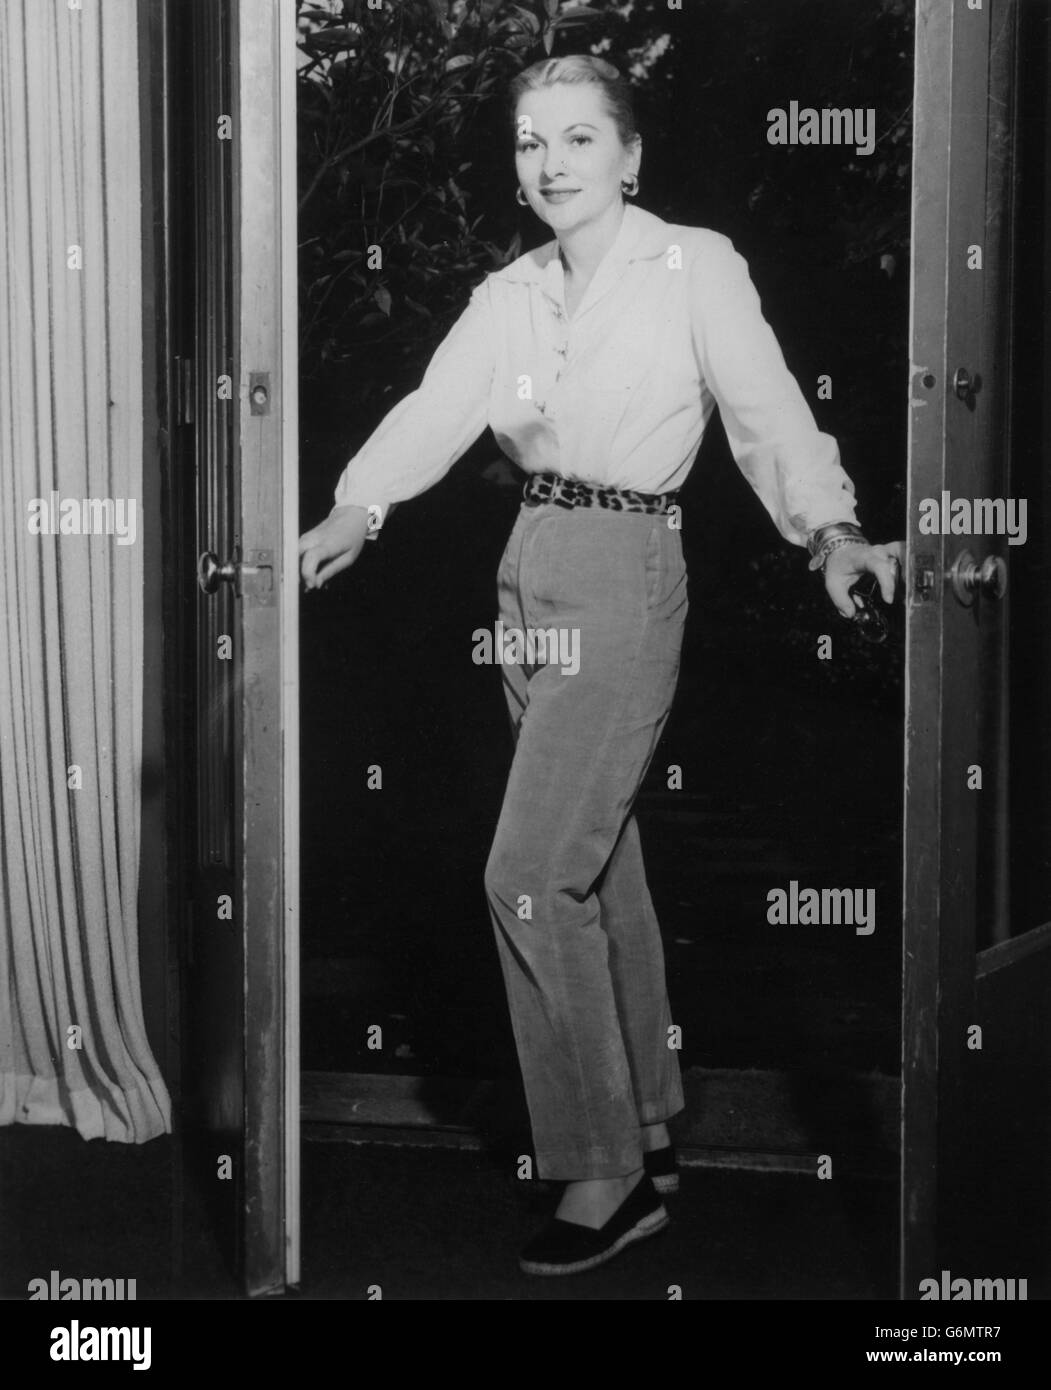 Actress Joan Fontaine, who is now starring in MGM's 'Until They Sail', likes to wear comfortable casual clothing around the house. She is seen here in mustard velveteen trousers teamed teamed with a white Italian silk blouse having hand-wrought gold buttons. A leopard belt and black espadrilles complete the costume. Stock Photo